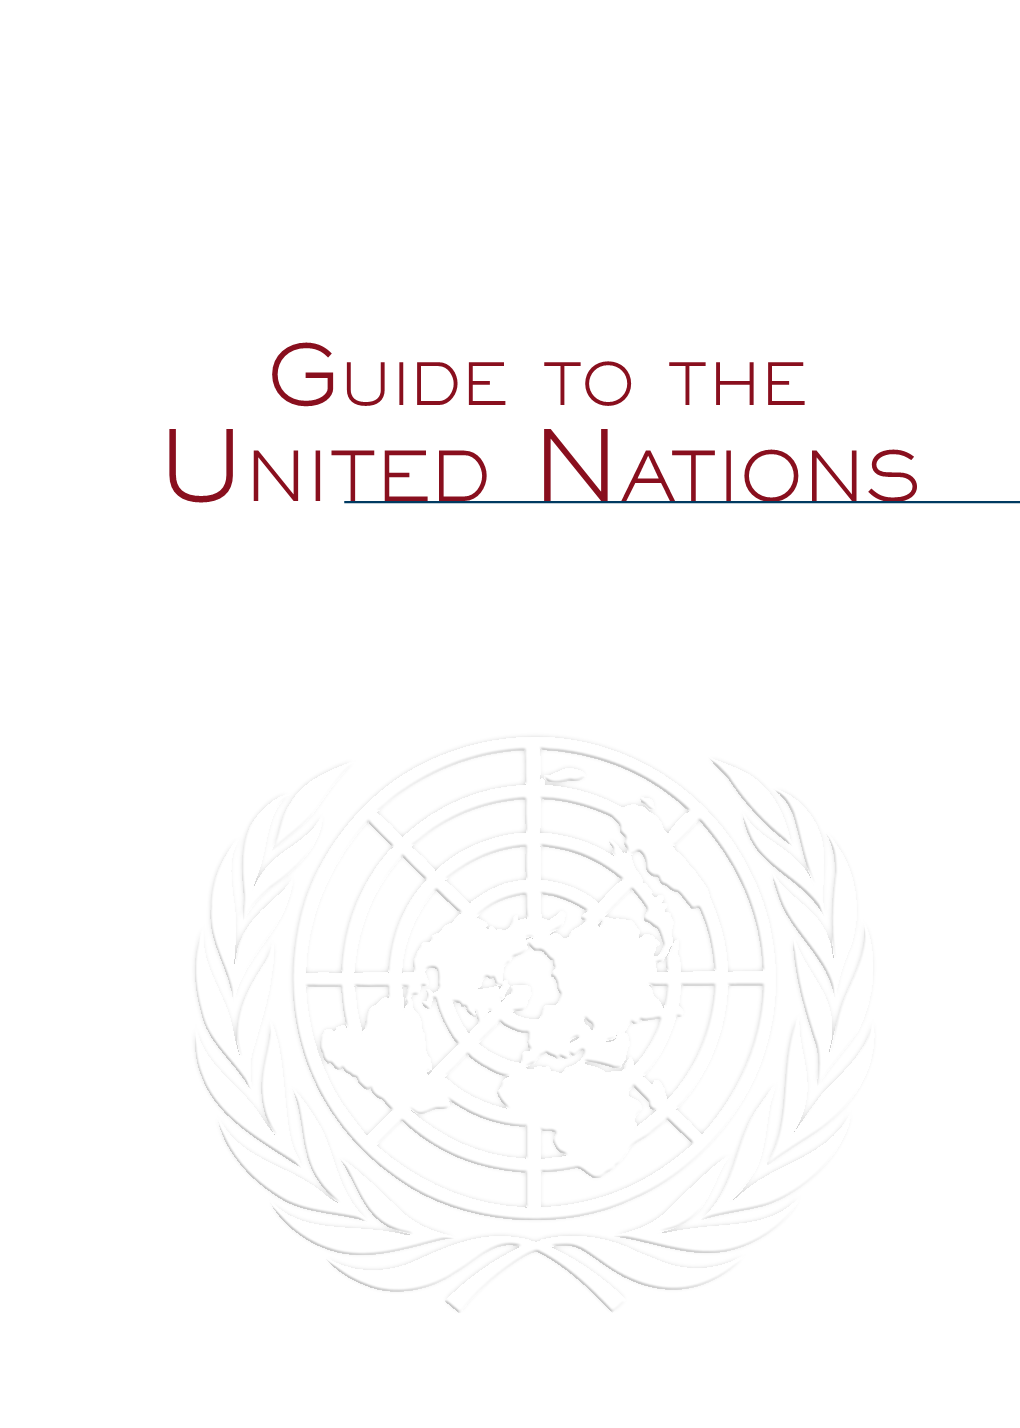 Guide to the United Nations 3